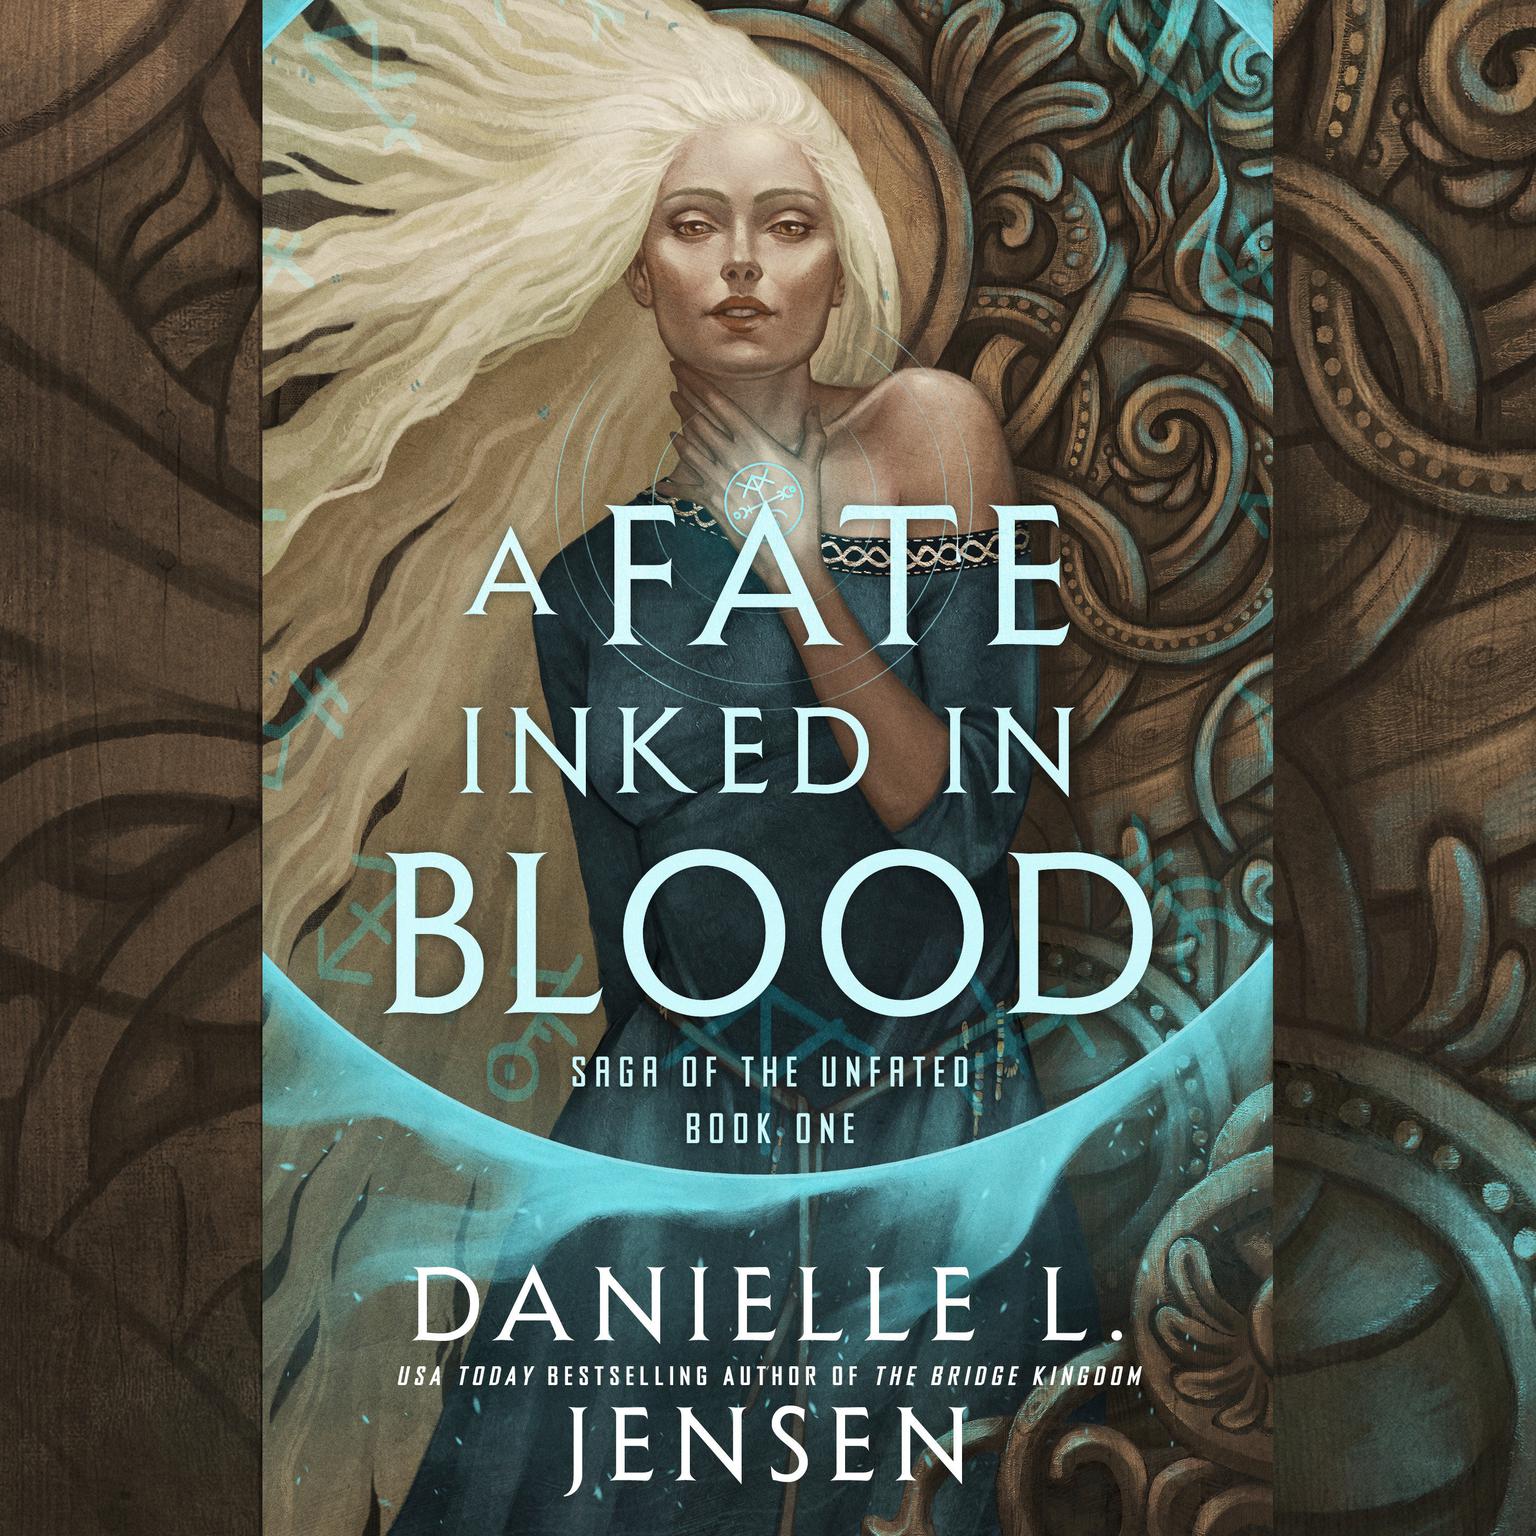 A Fate Inked in Blood: Book One of the Saga of the Unfated Audiobook, by Danielle L. Jensen